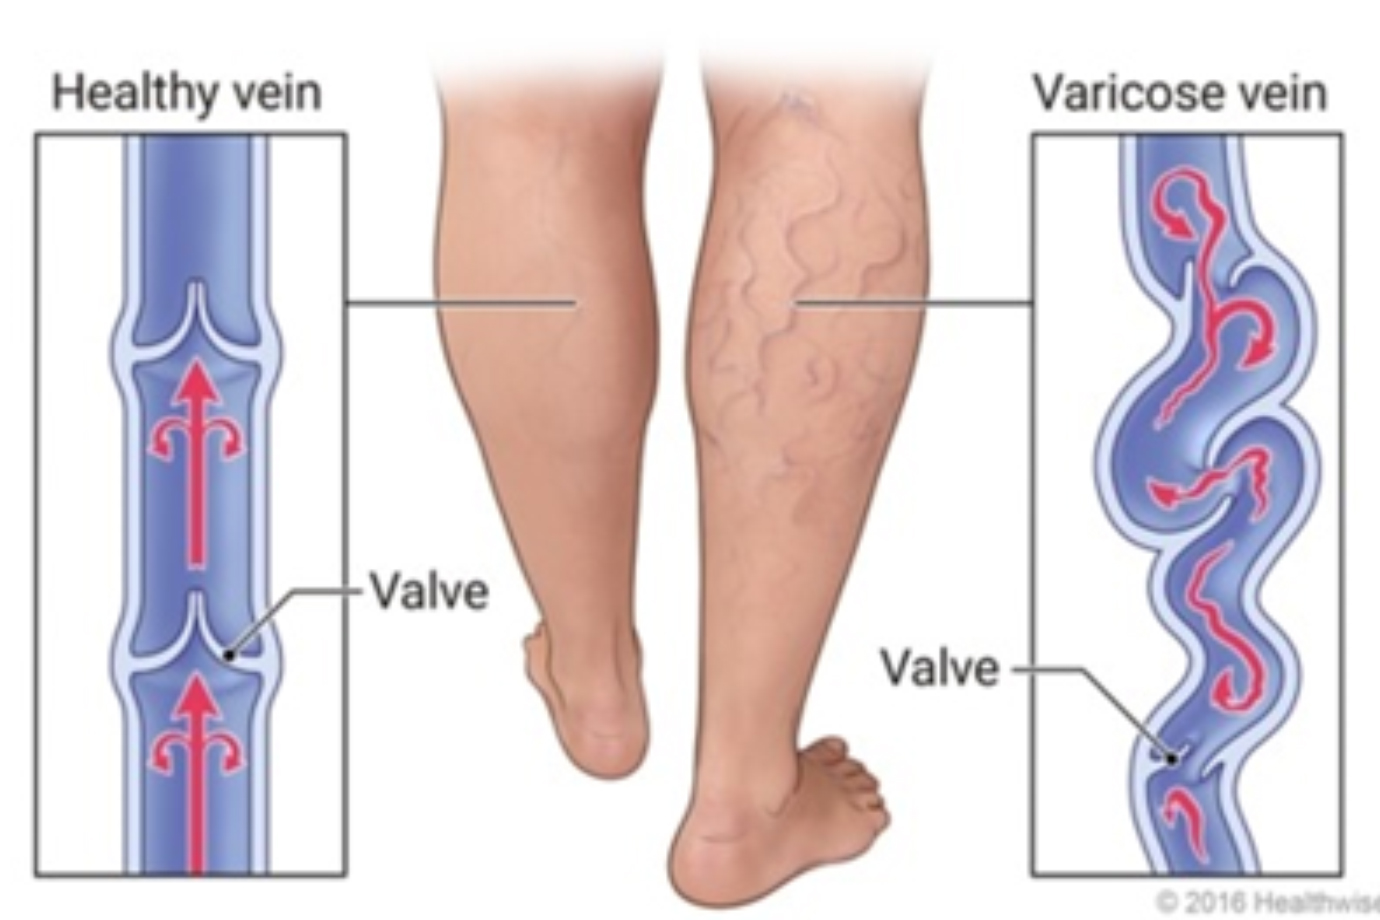 General Information about Varicose Veins and Their Treatmentss